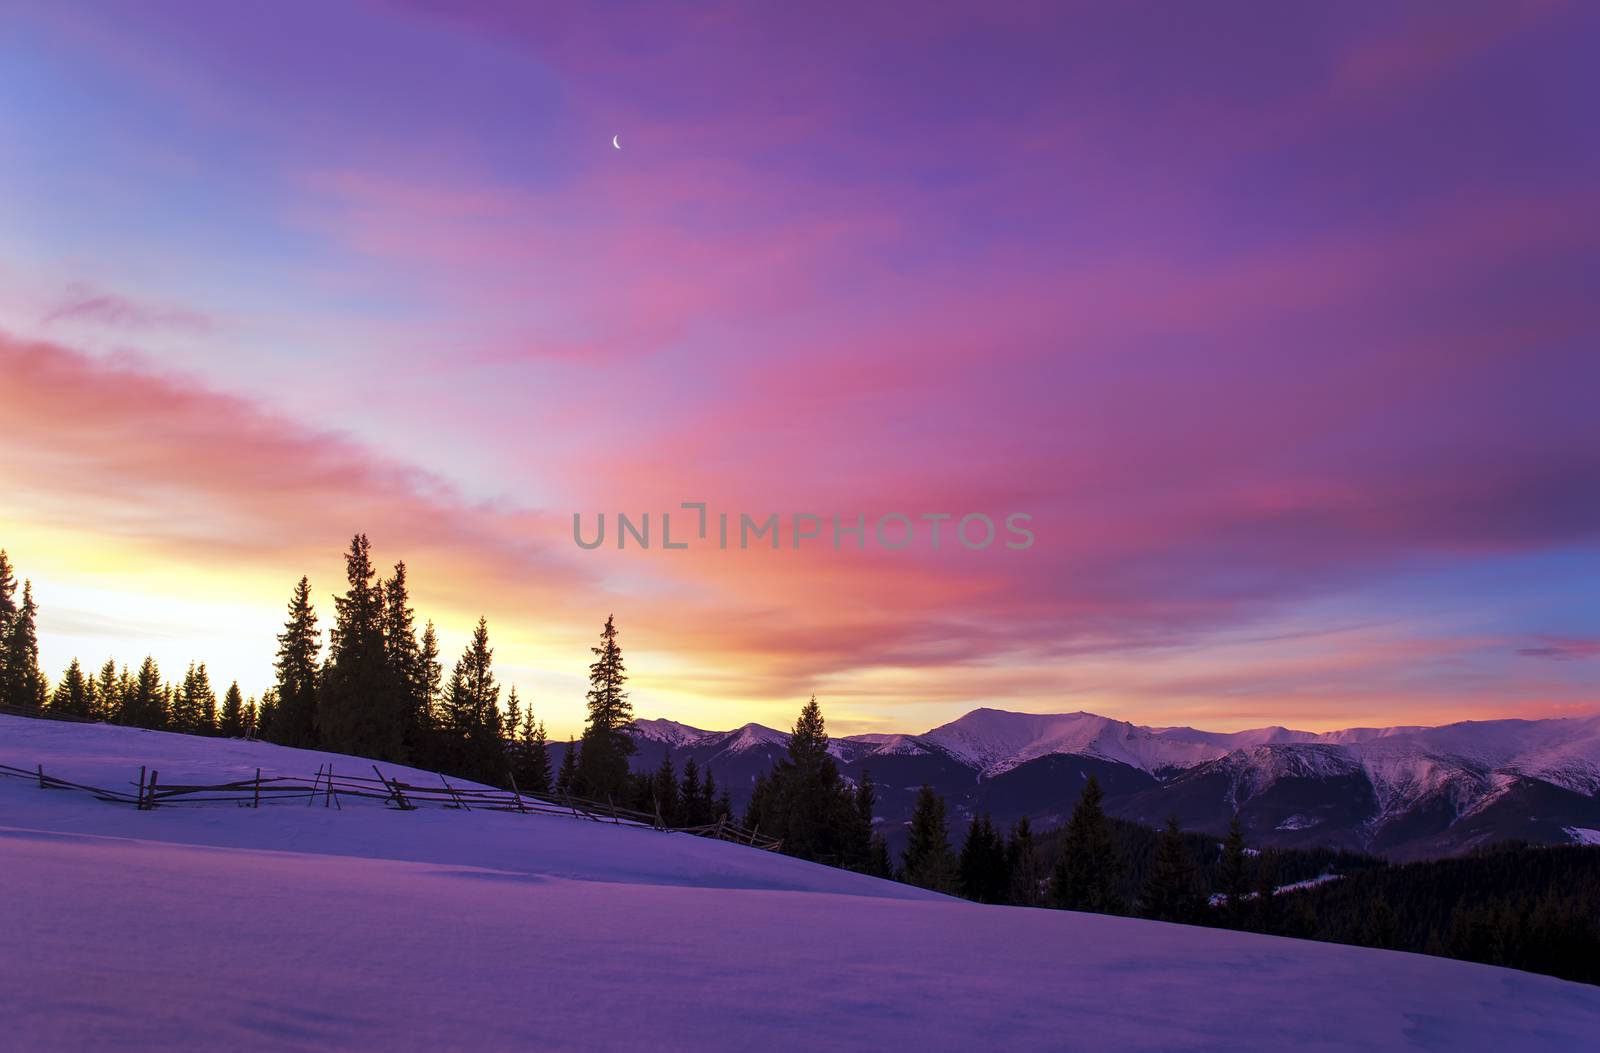 Winter morning landscape. The sun rises behind trees and lights up the clouds. Mountain ridge. The moon In the sky. Wooden fence in snowy field. Twilight. Purple colors. Romantic mood